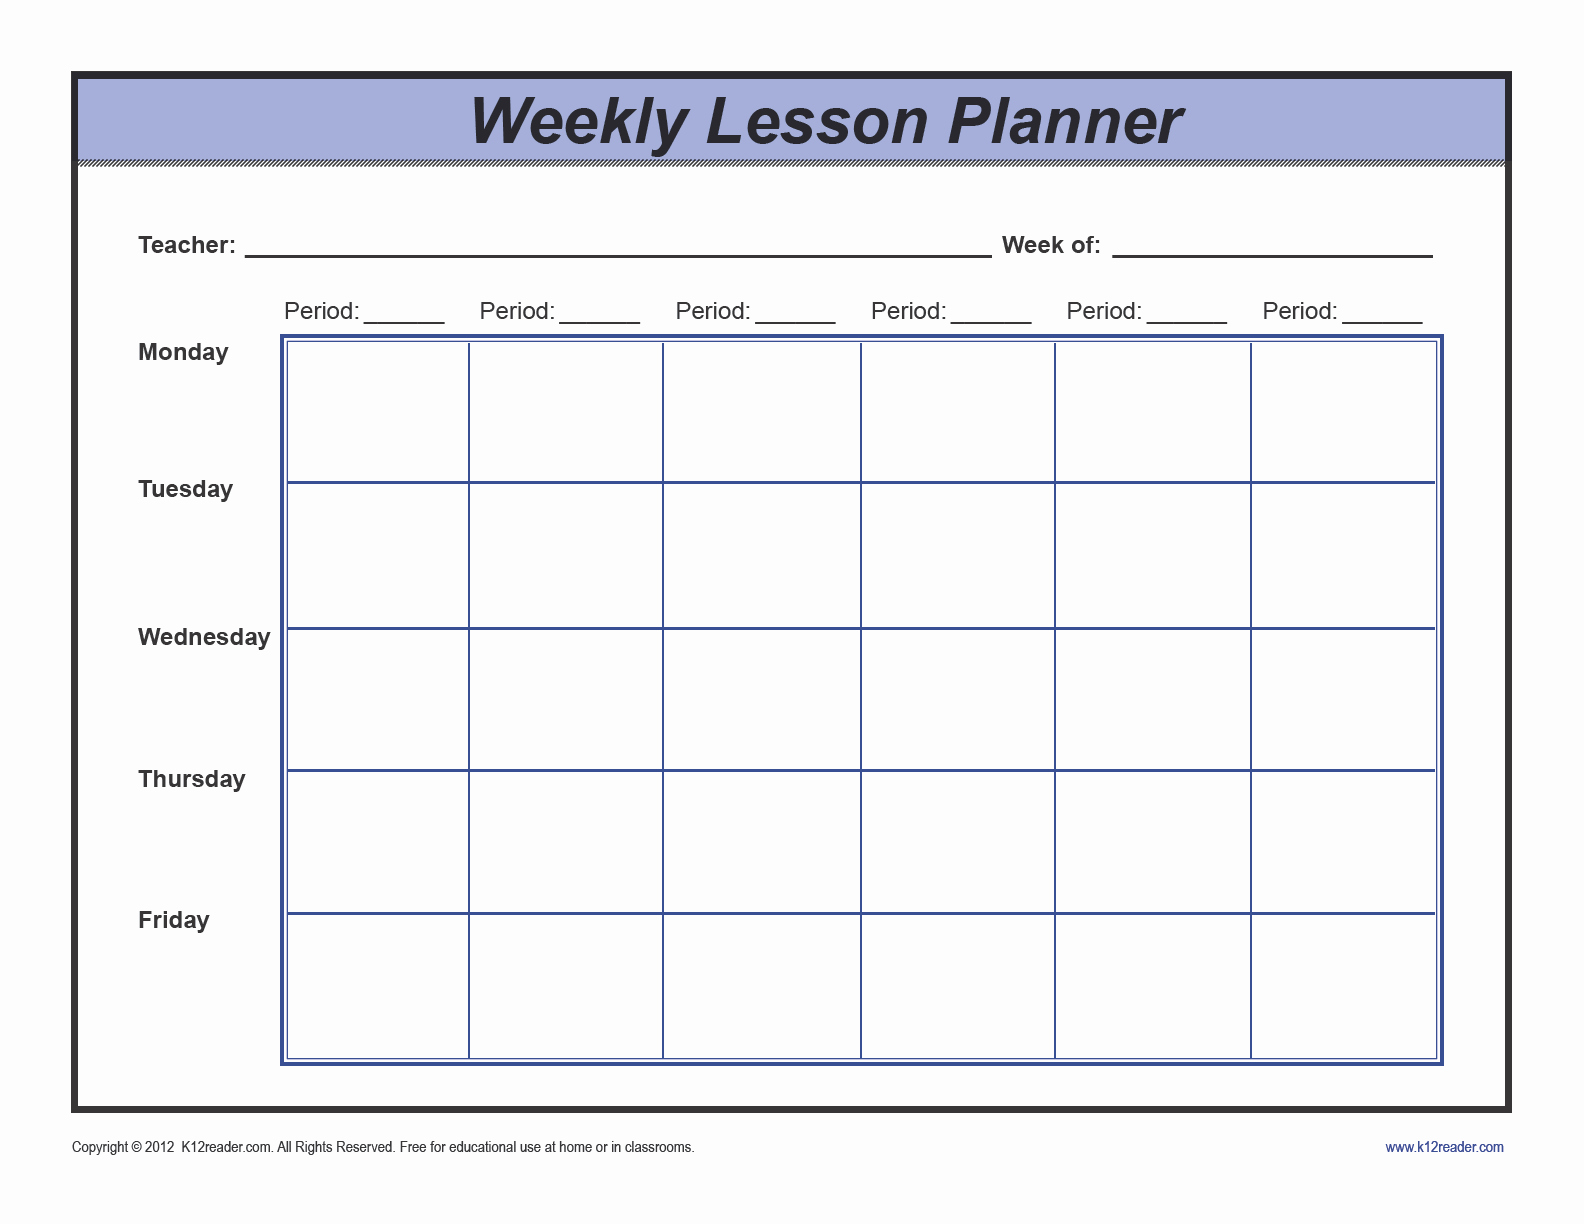 Weekly Lesson Plan Template Pdf Awesome Download Weekly Lesson Plan Template Preschool